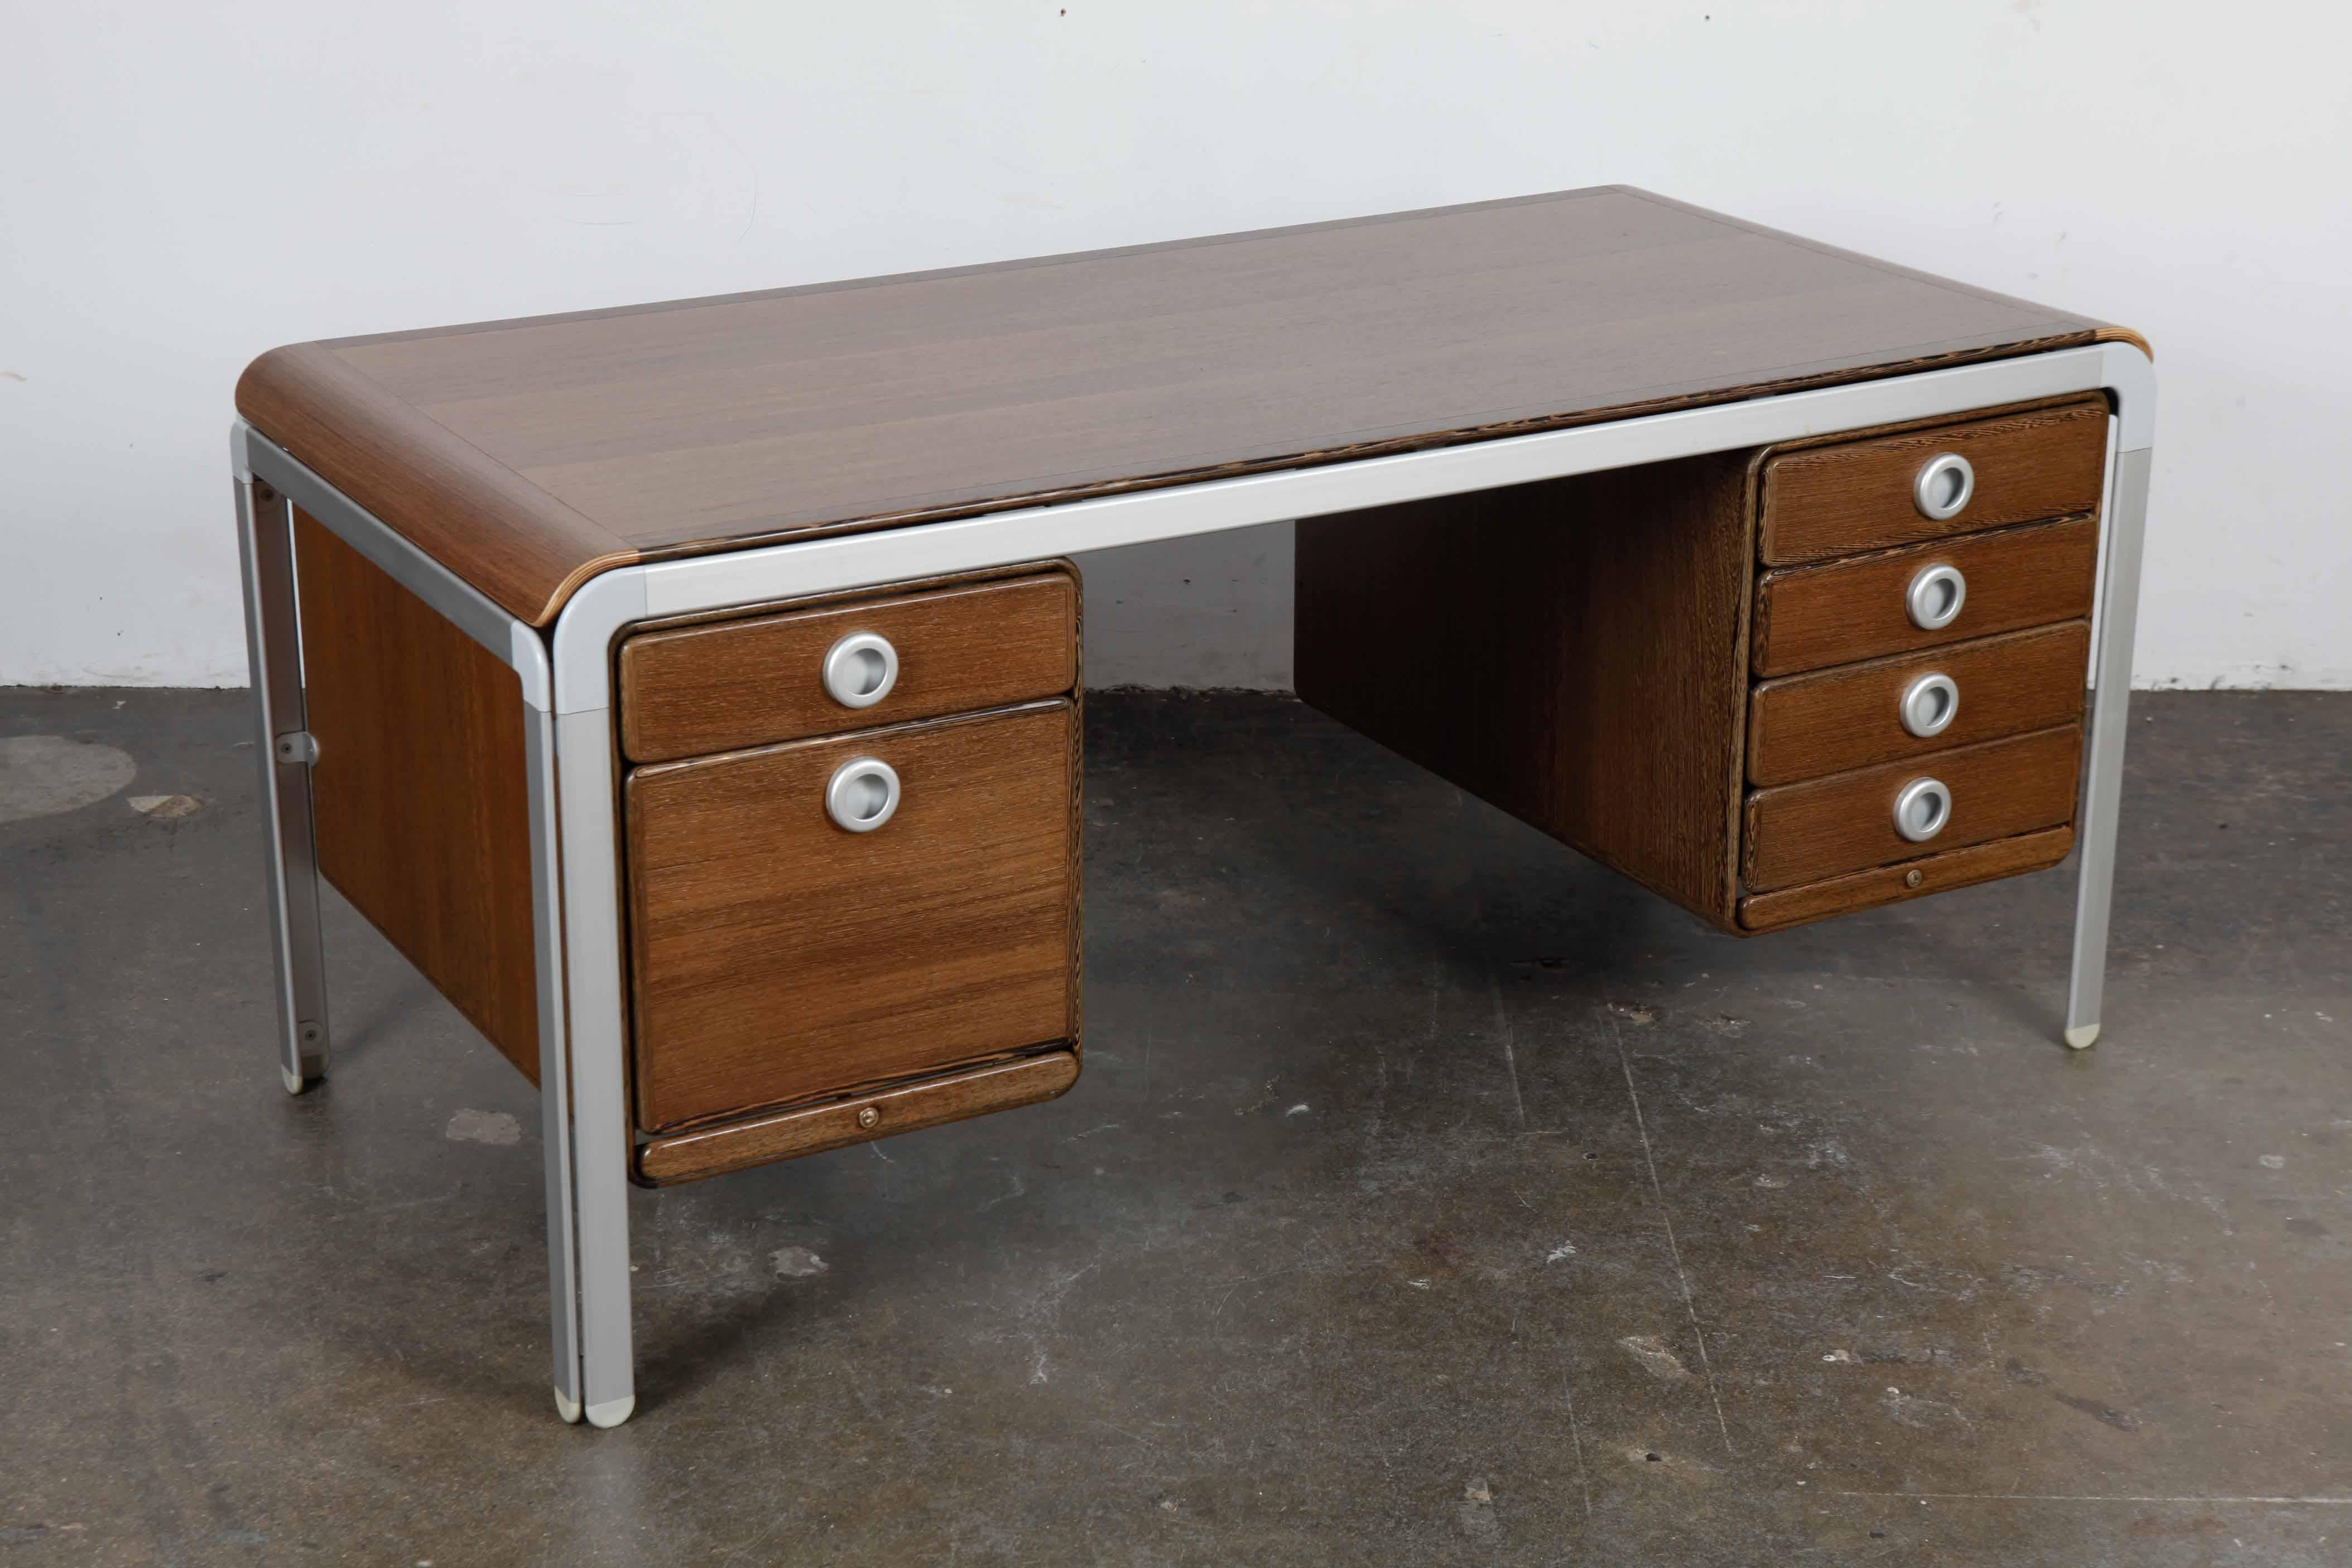 Rare Danish executive writing desk designed by Arne Jacobsen in 1971 for the Danish National Bank, named the 